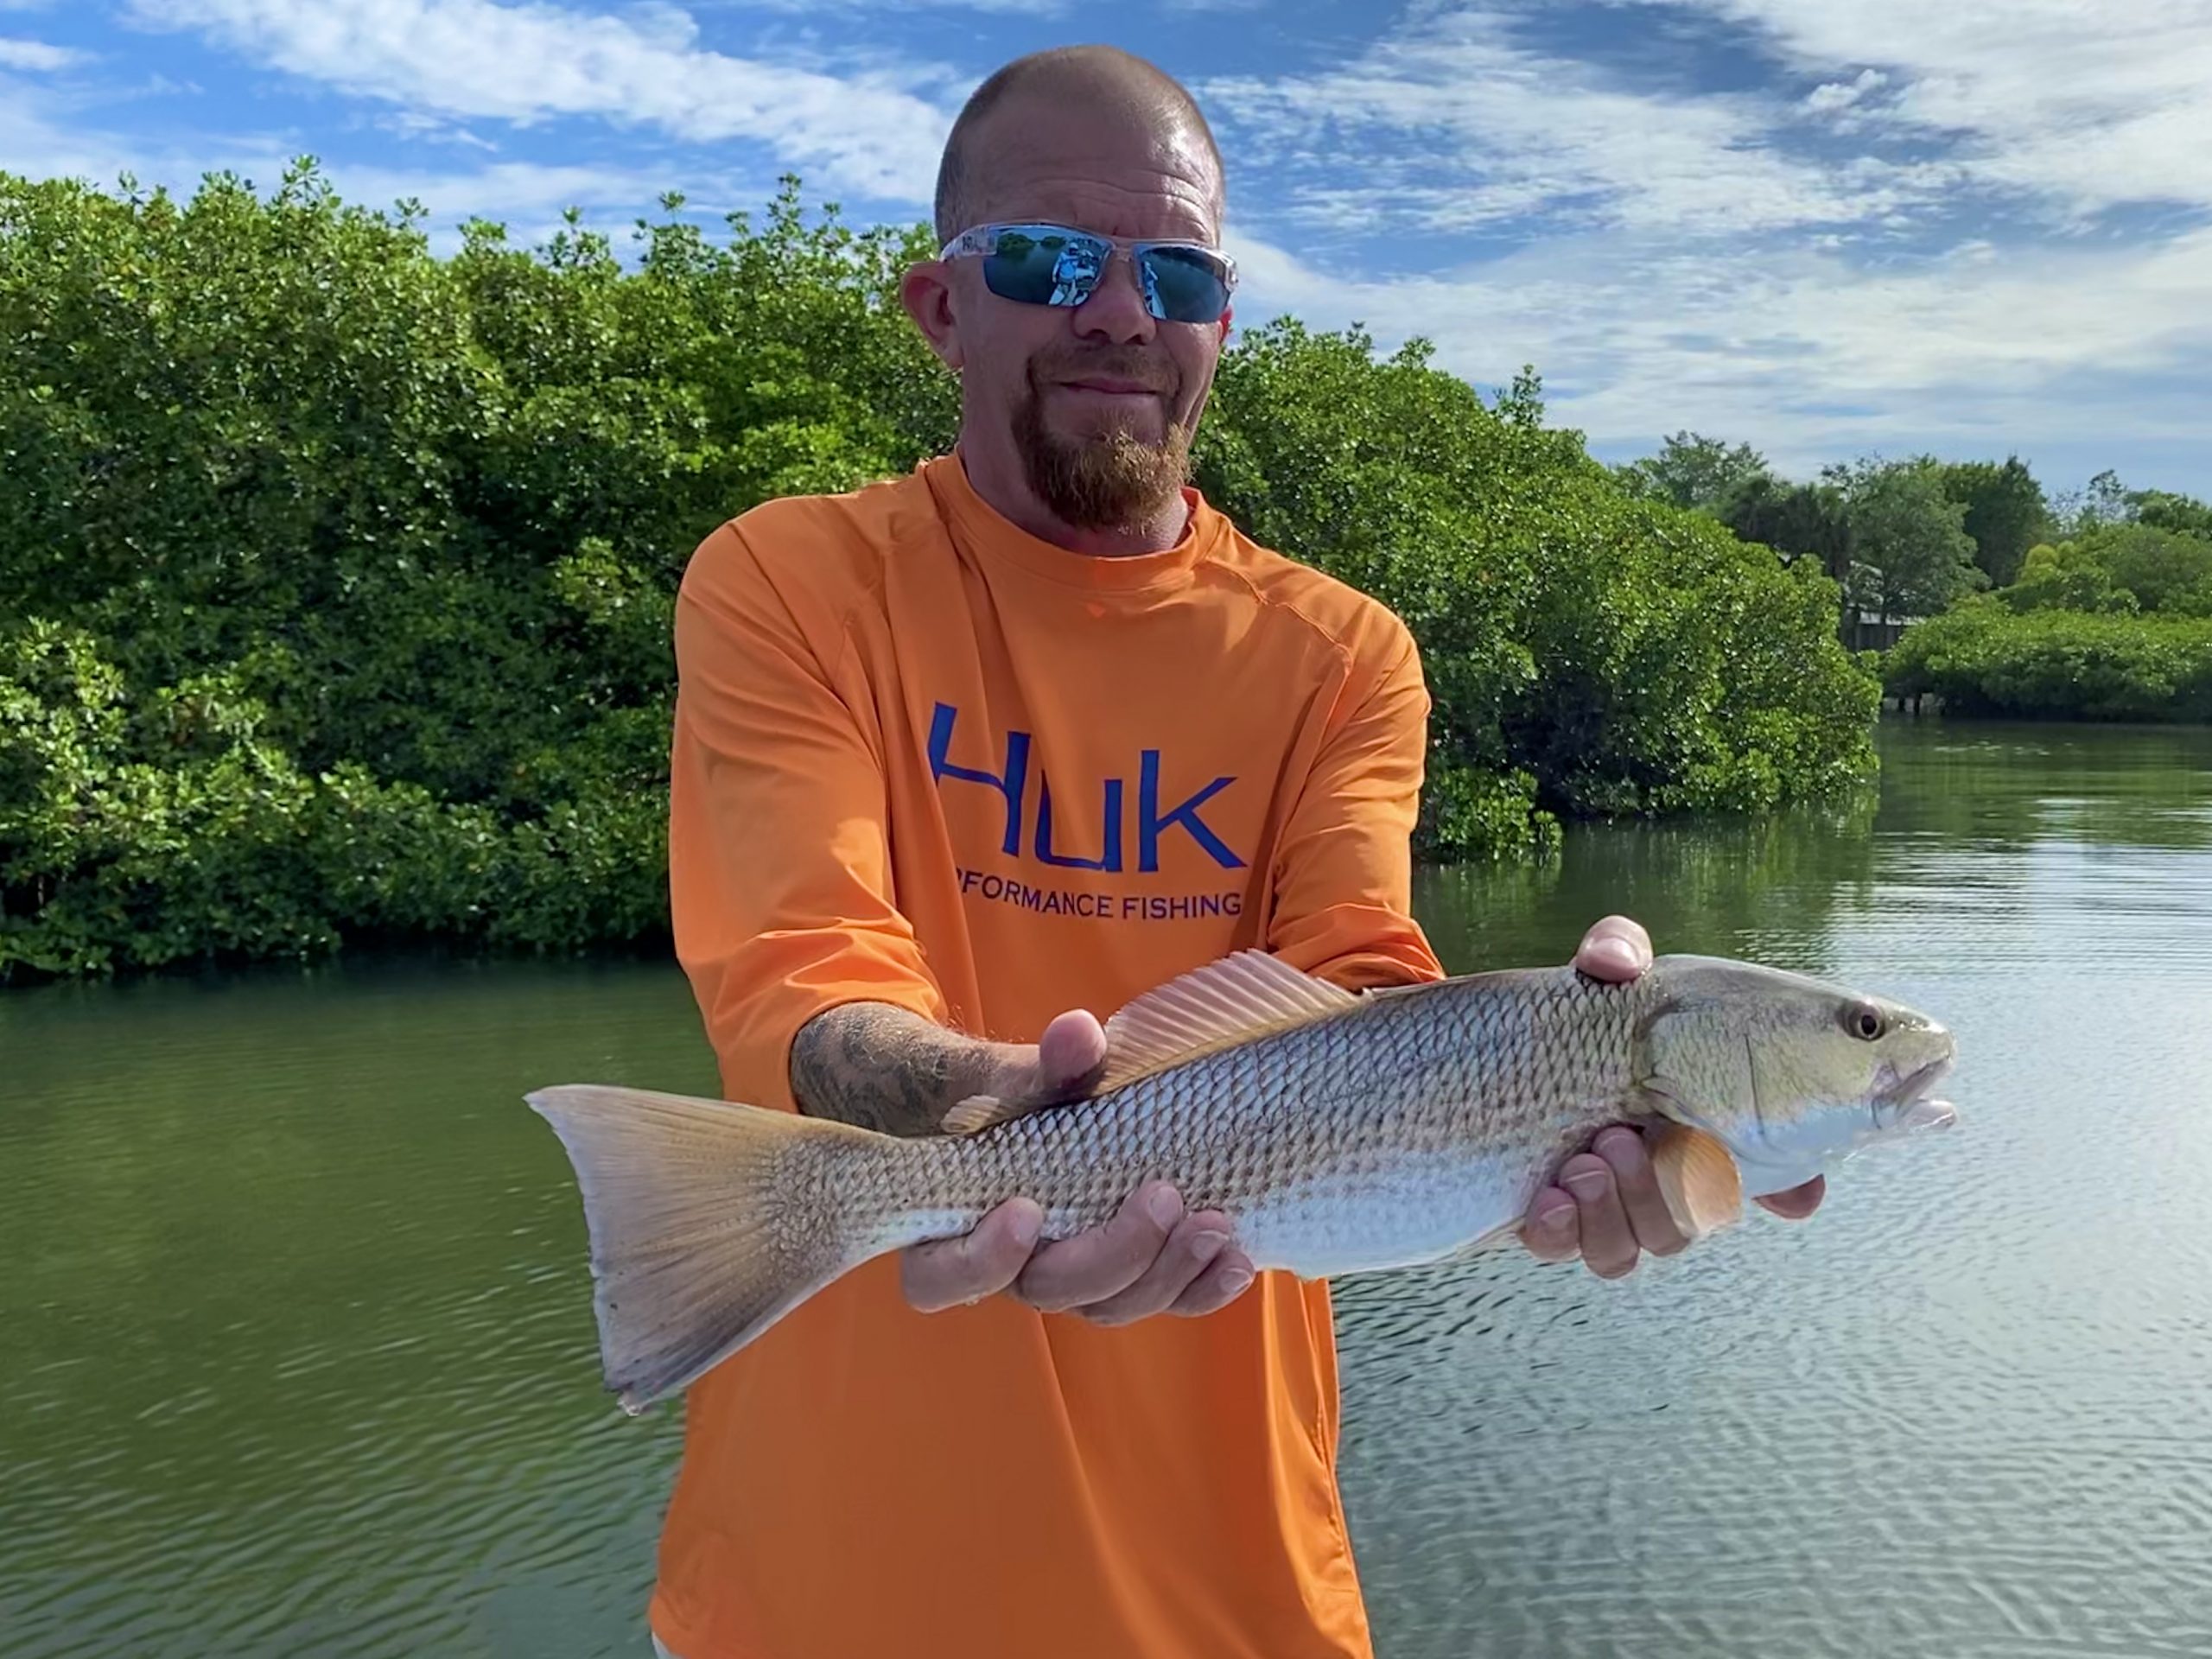 A bald angler wearing oakley sunglasses and a bright orange shirt holds a redfish for the camera